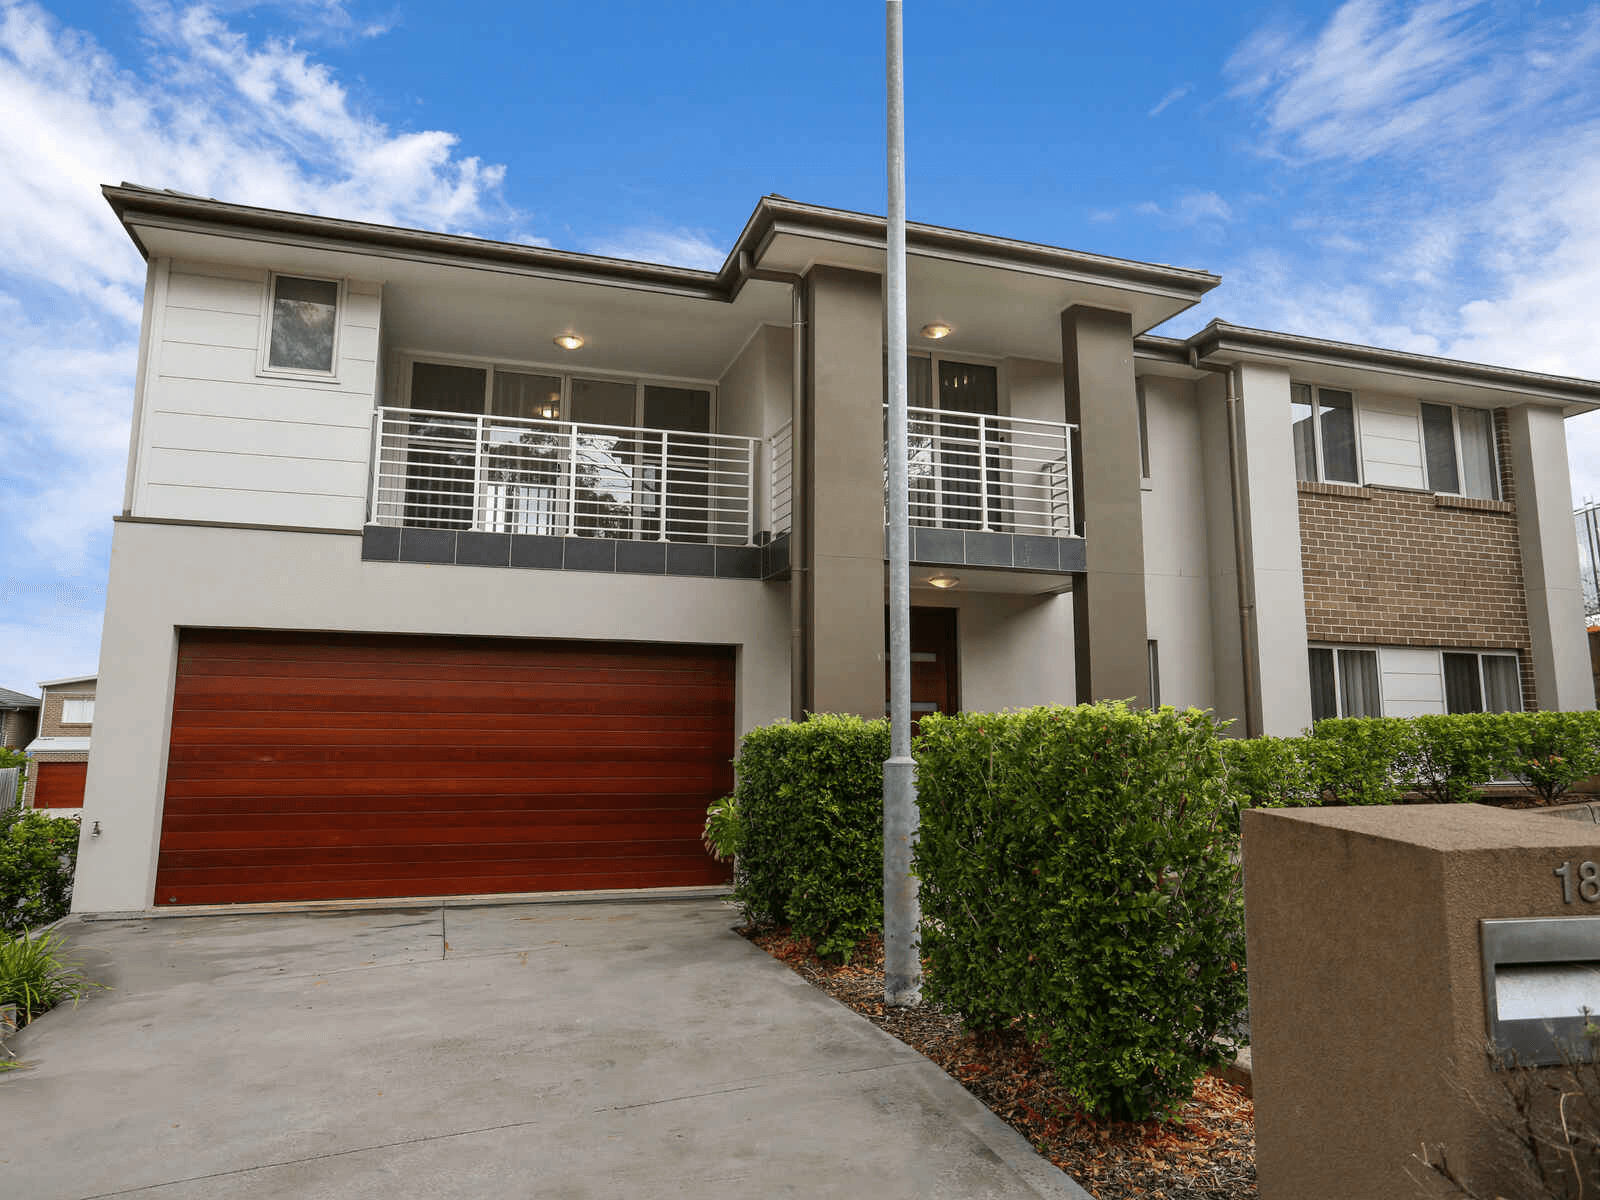 18 Clubside Drive, Norwest, NSW 2153